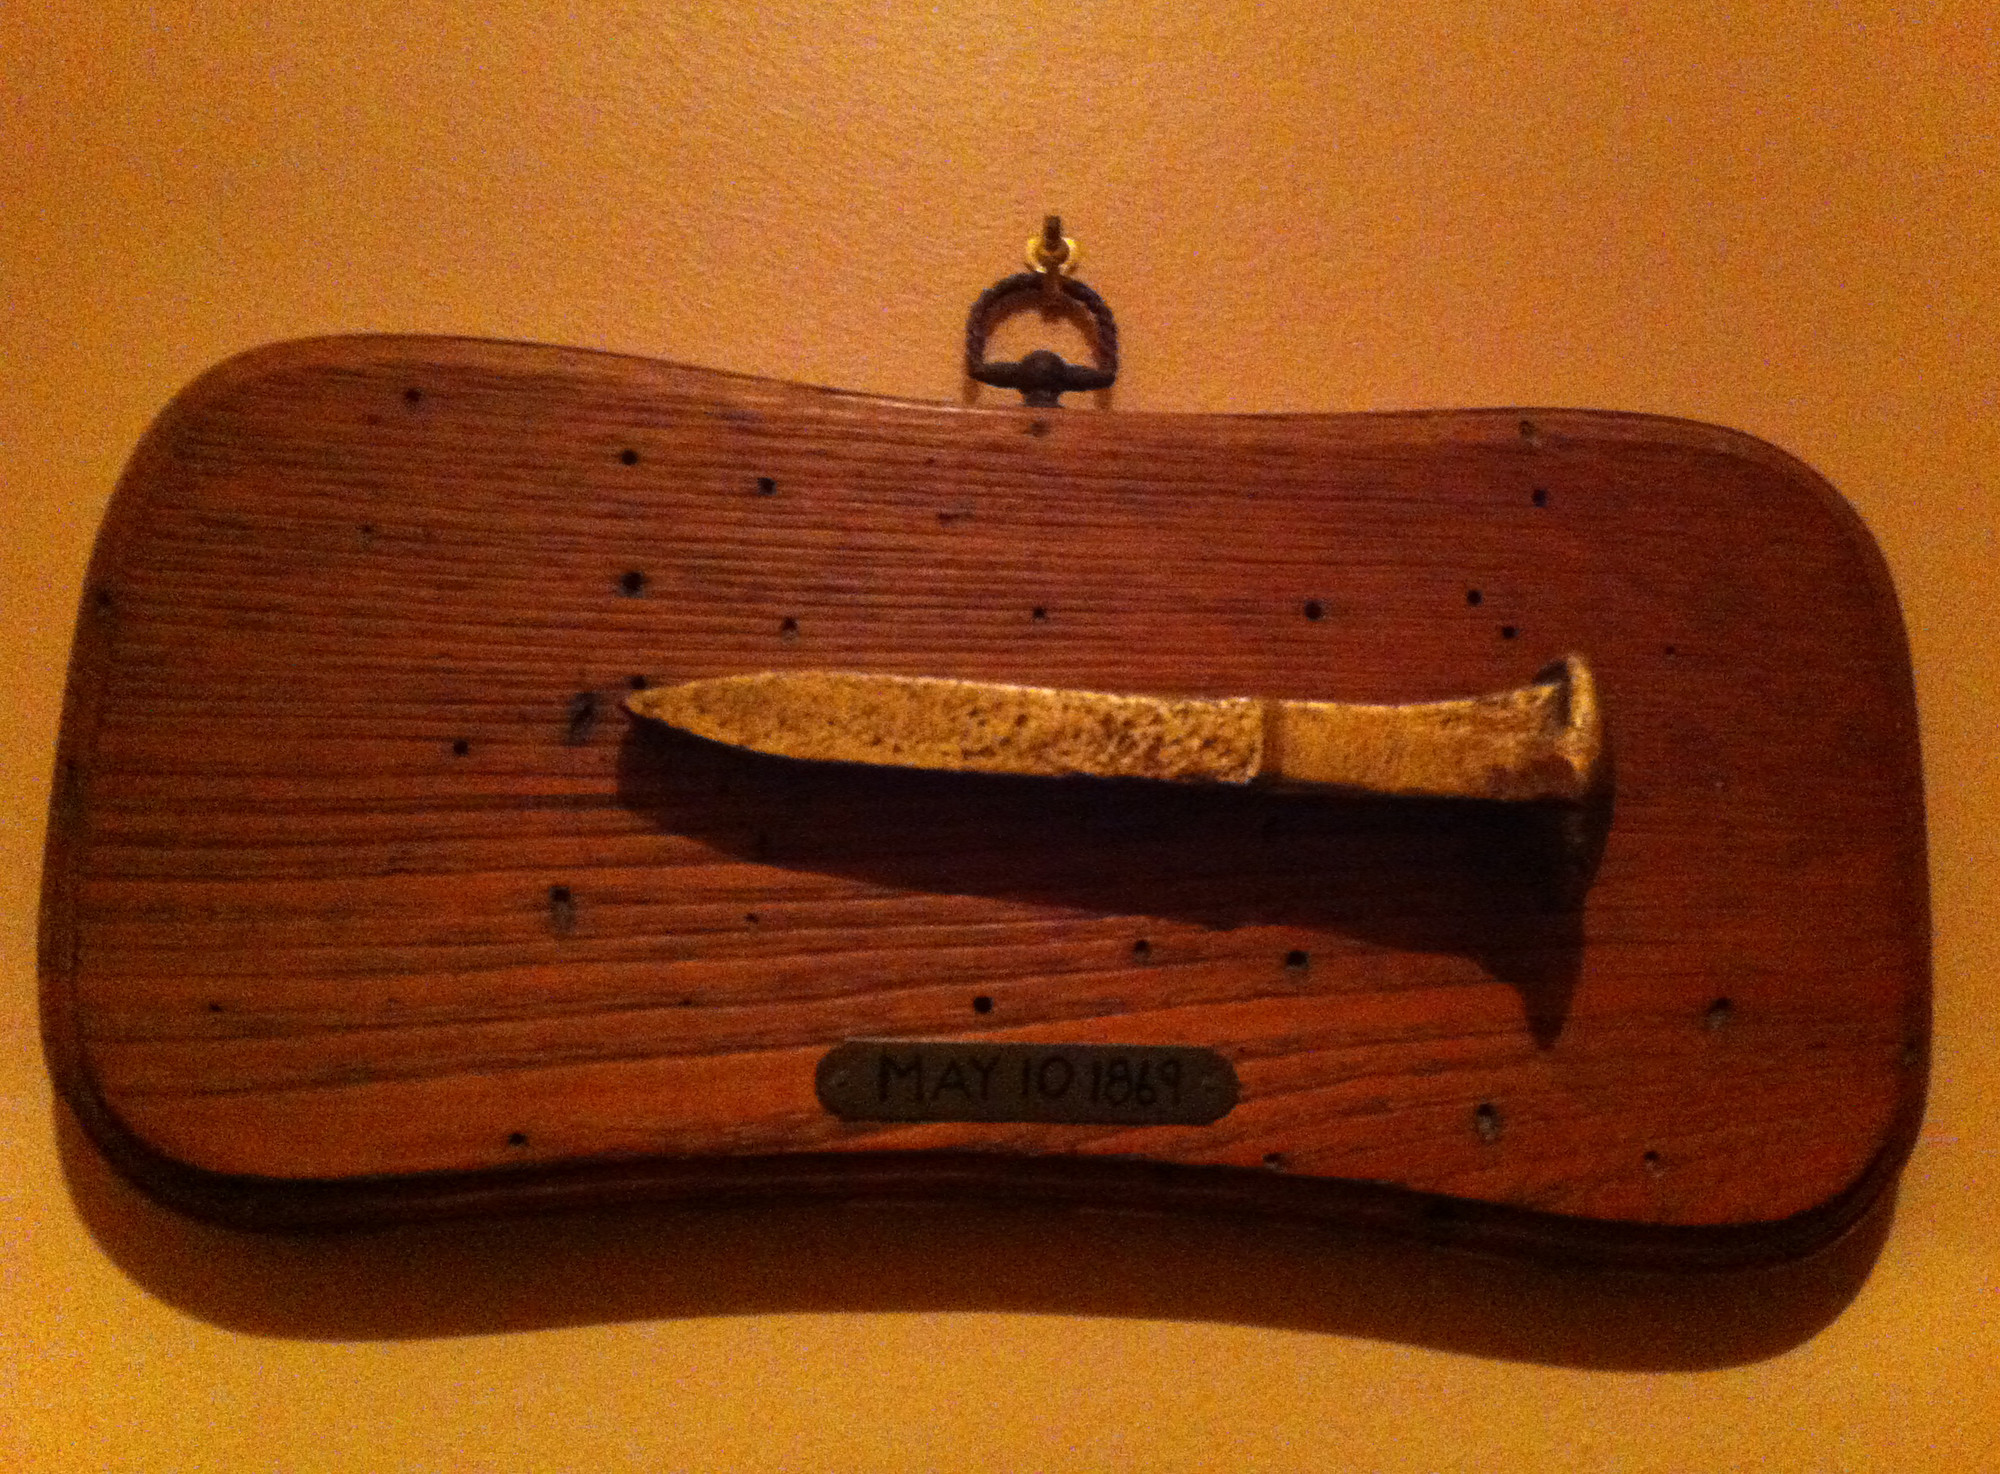 Eisenhardt knew his house was “a piece of history” when he found a mounted railroad spike dated May 10, 1869.